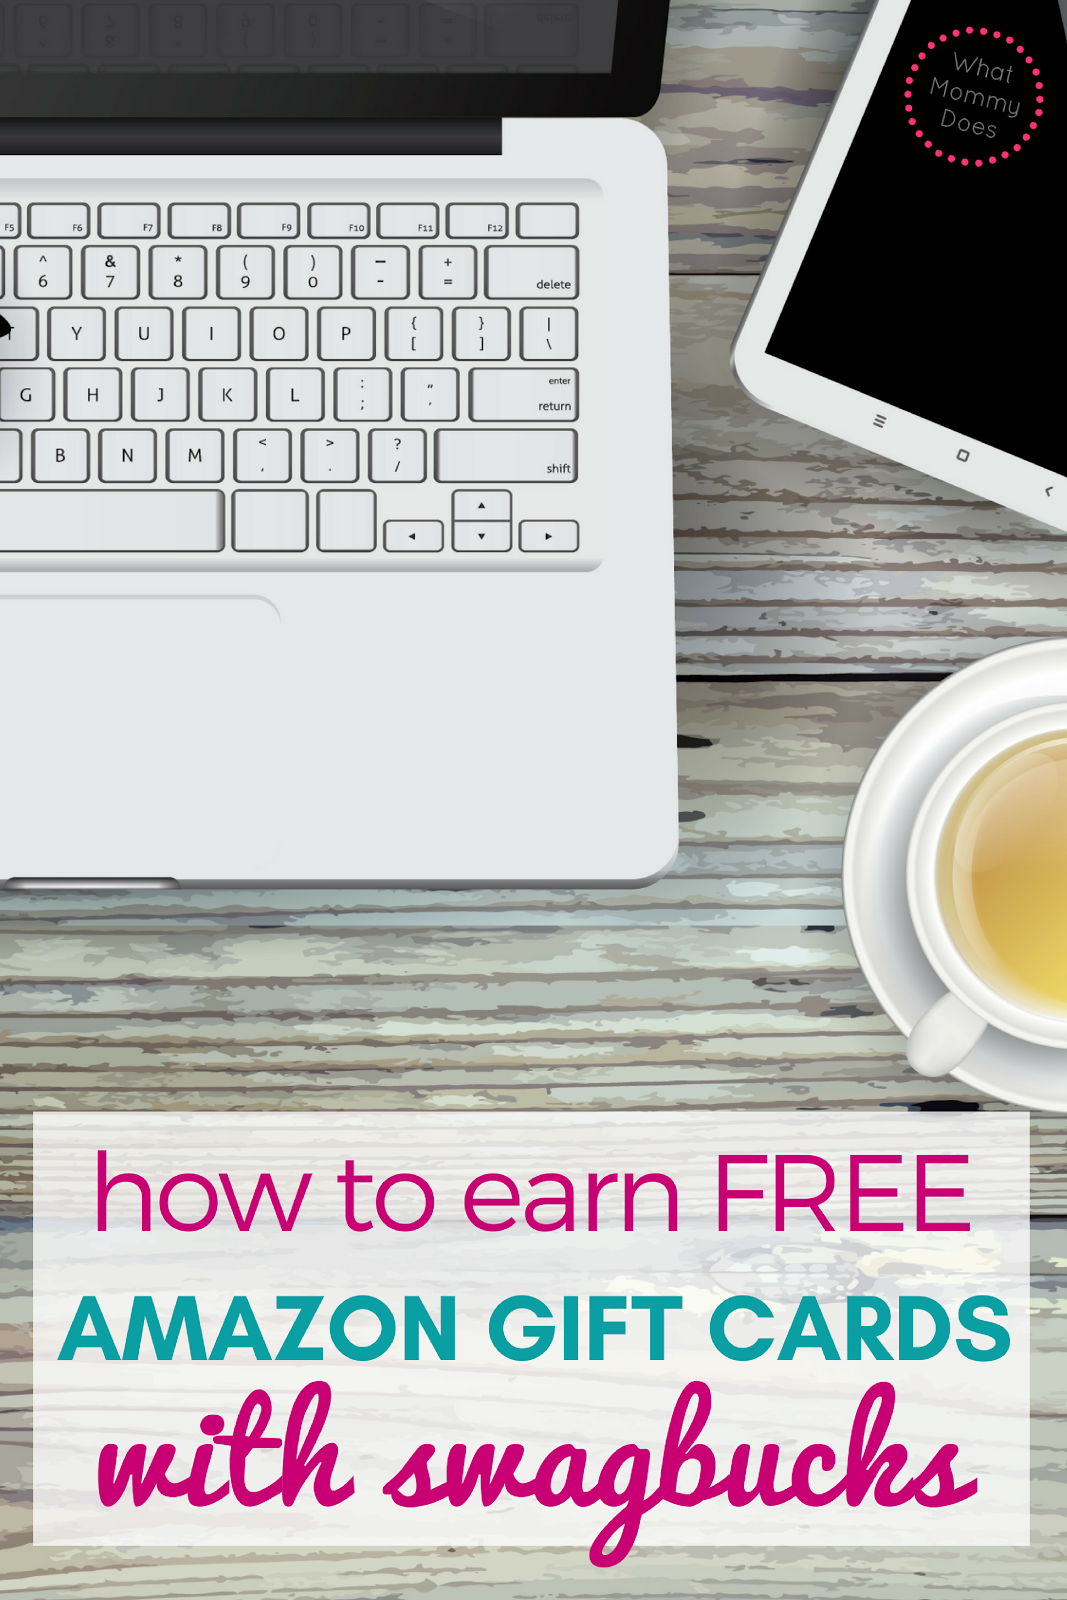 How to Use Swagbucks & Earn Free Amazon Gift Cards | What Mommy Does1067 x 1600